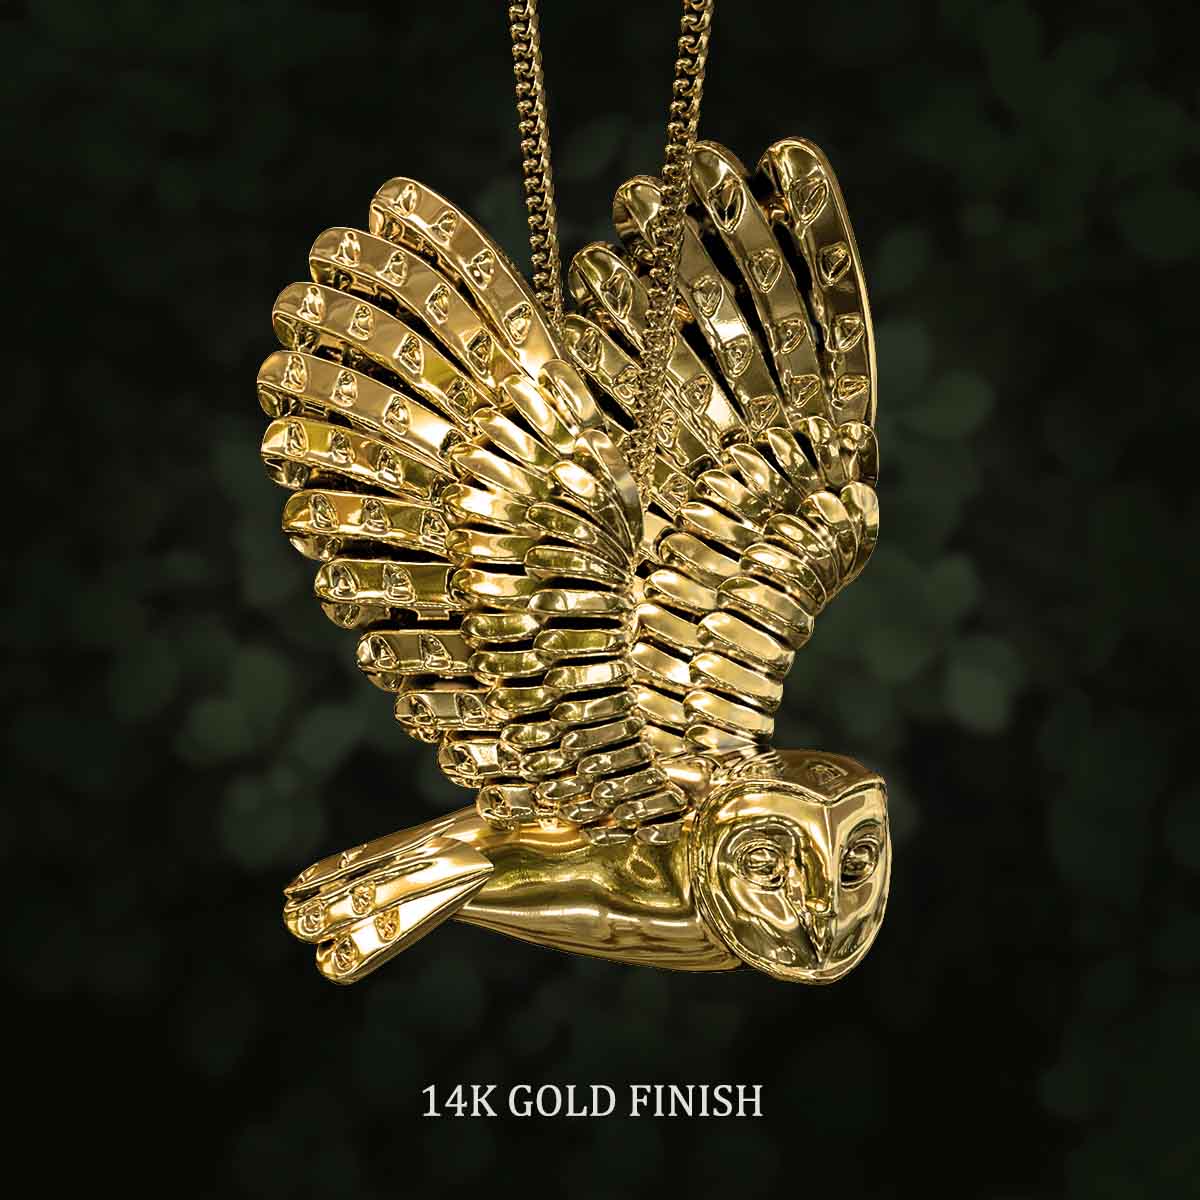 14k-Gold-Finish-Barn-Owl-Wings-Up-Pendant-Jewelry-For-Necklace